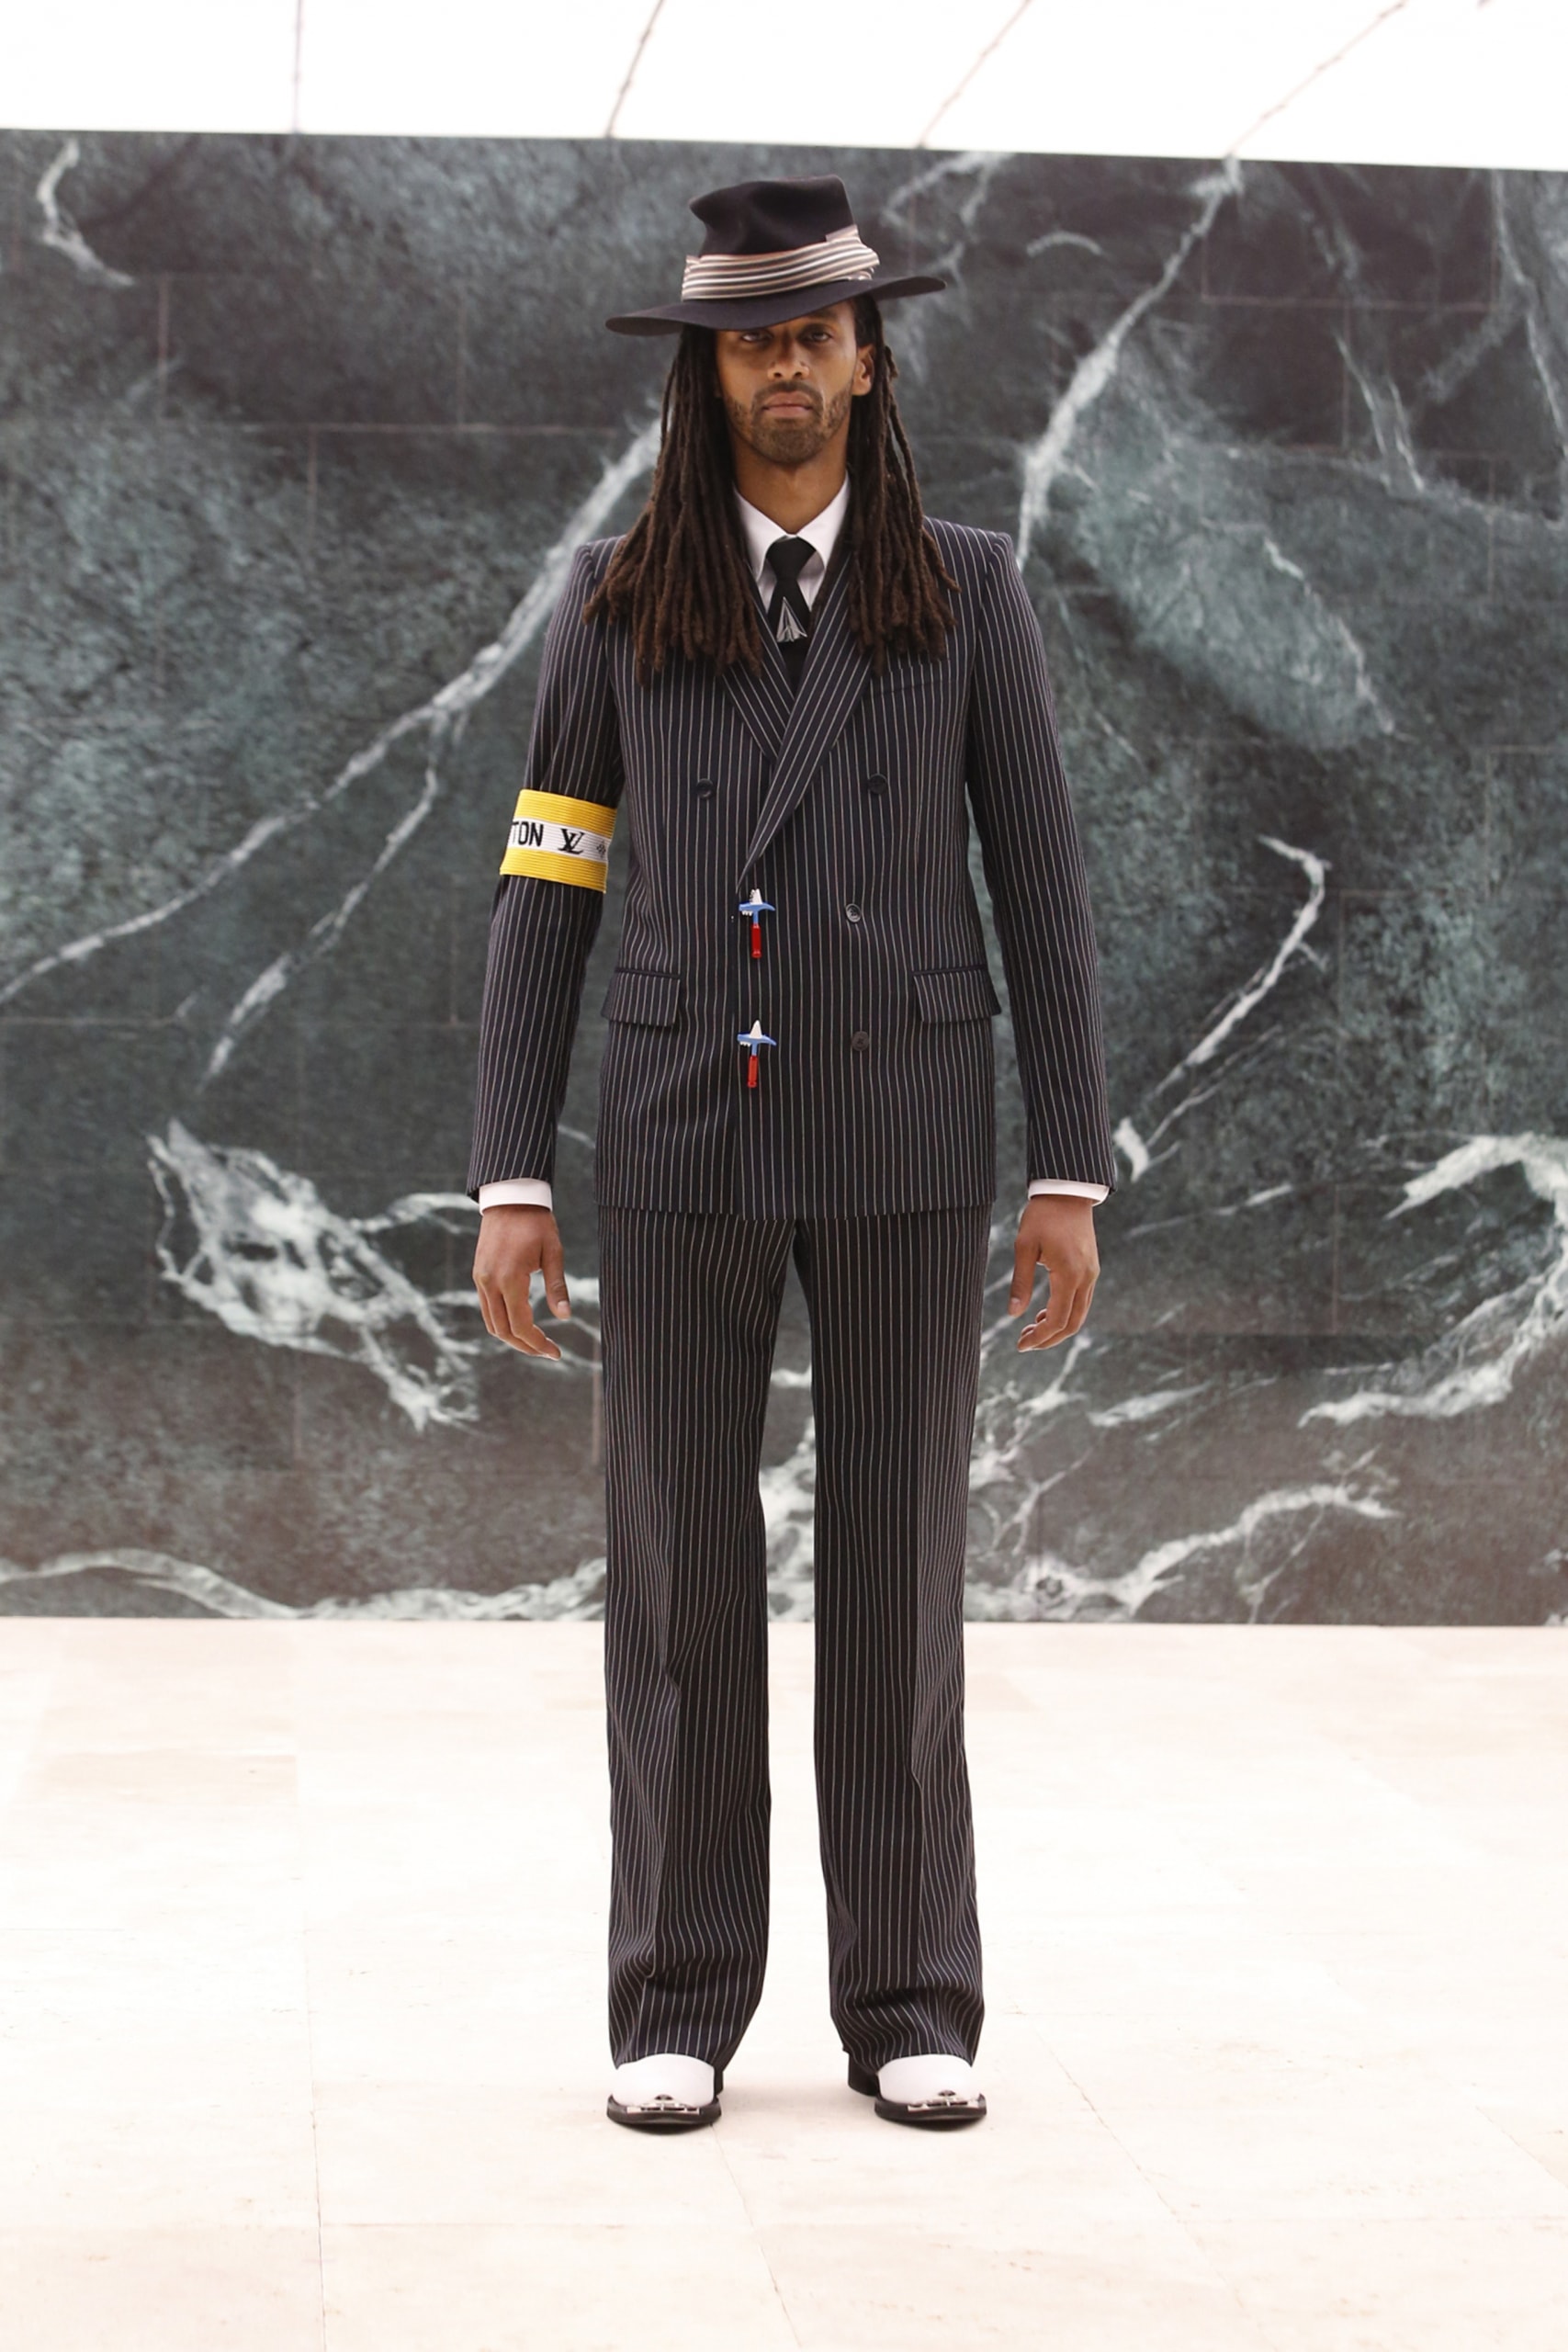 Virgil Abloh Louis Vuitton Men's Fall/Winter 2021 Menswear Collection References Fashion Collection Inspiration 